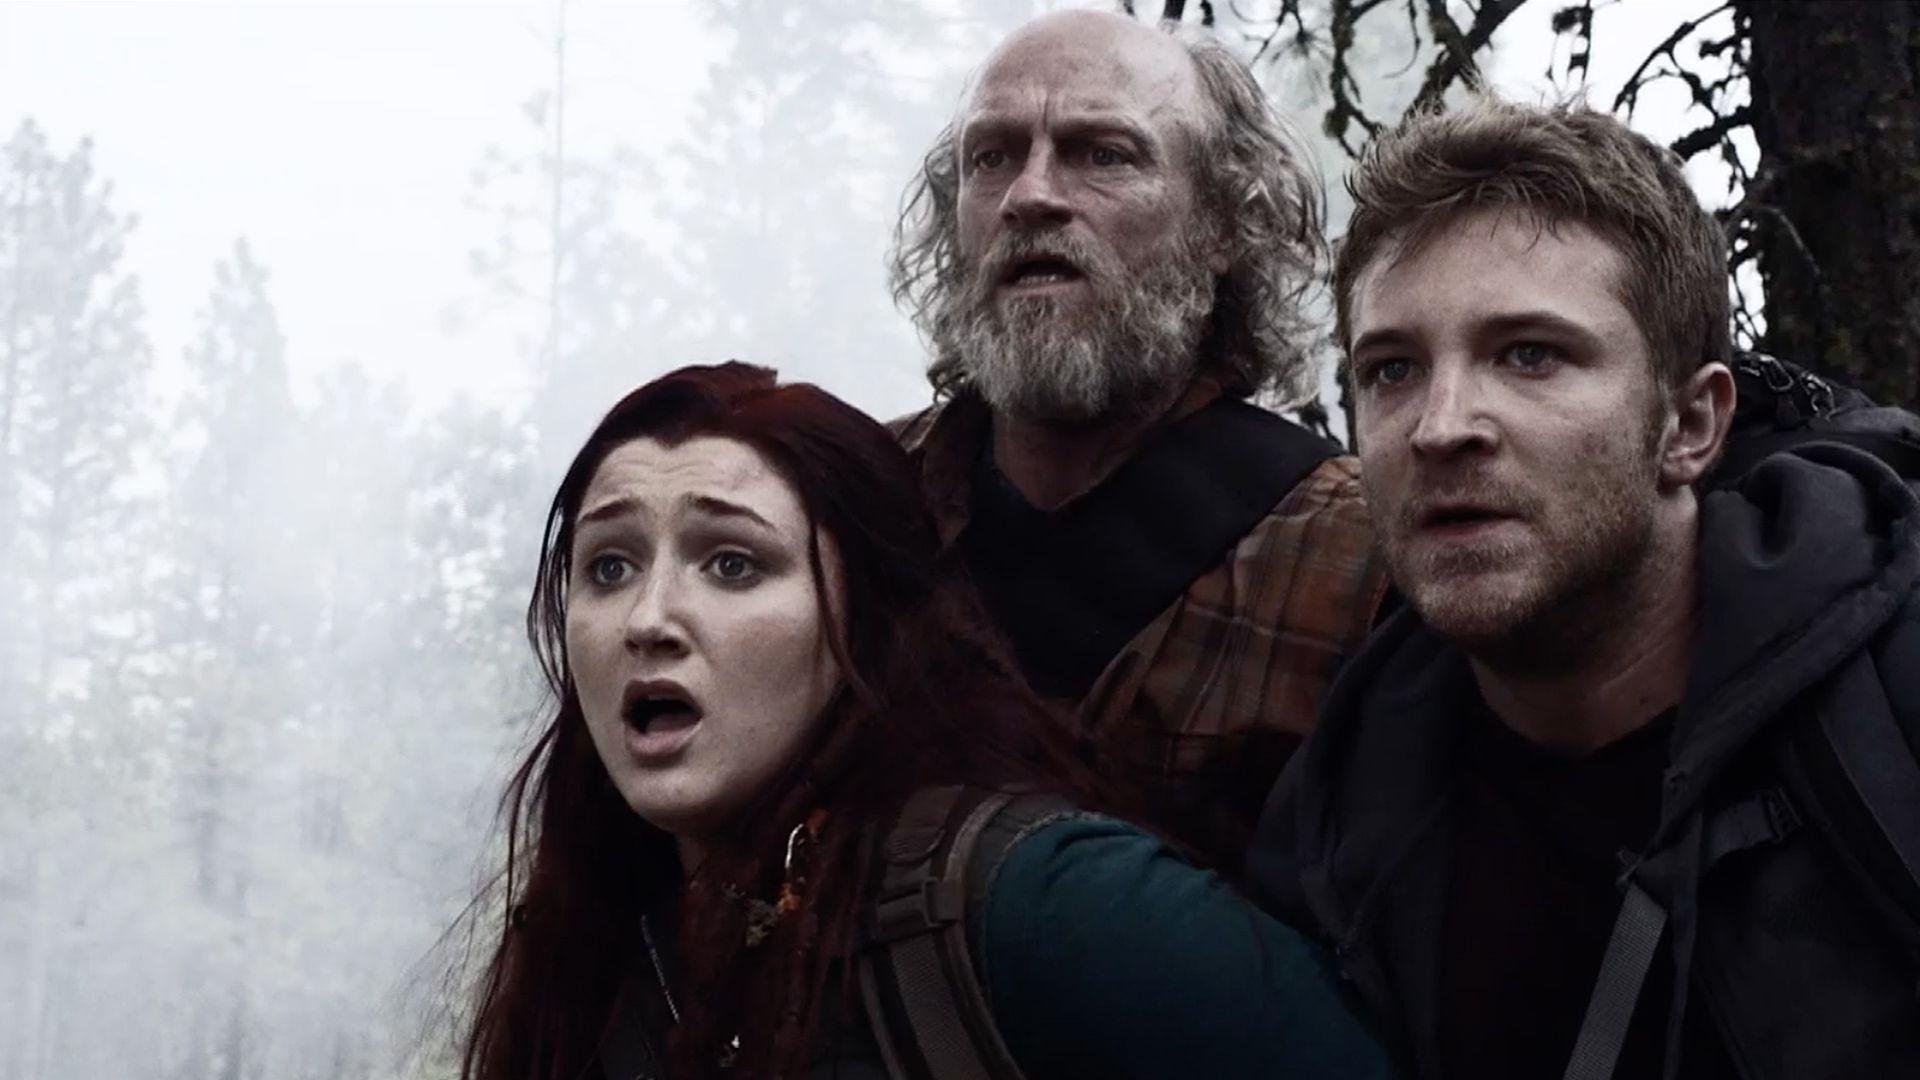 Z Nation Episode 1 Review: Puppies and Kittens. TV Recaps